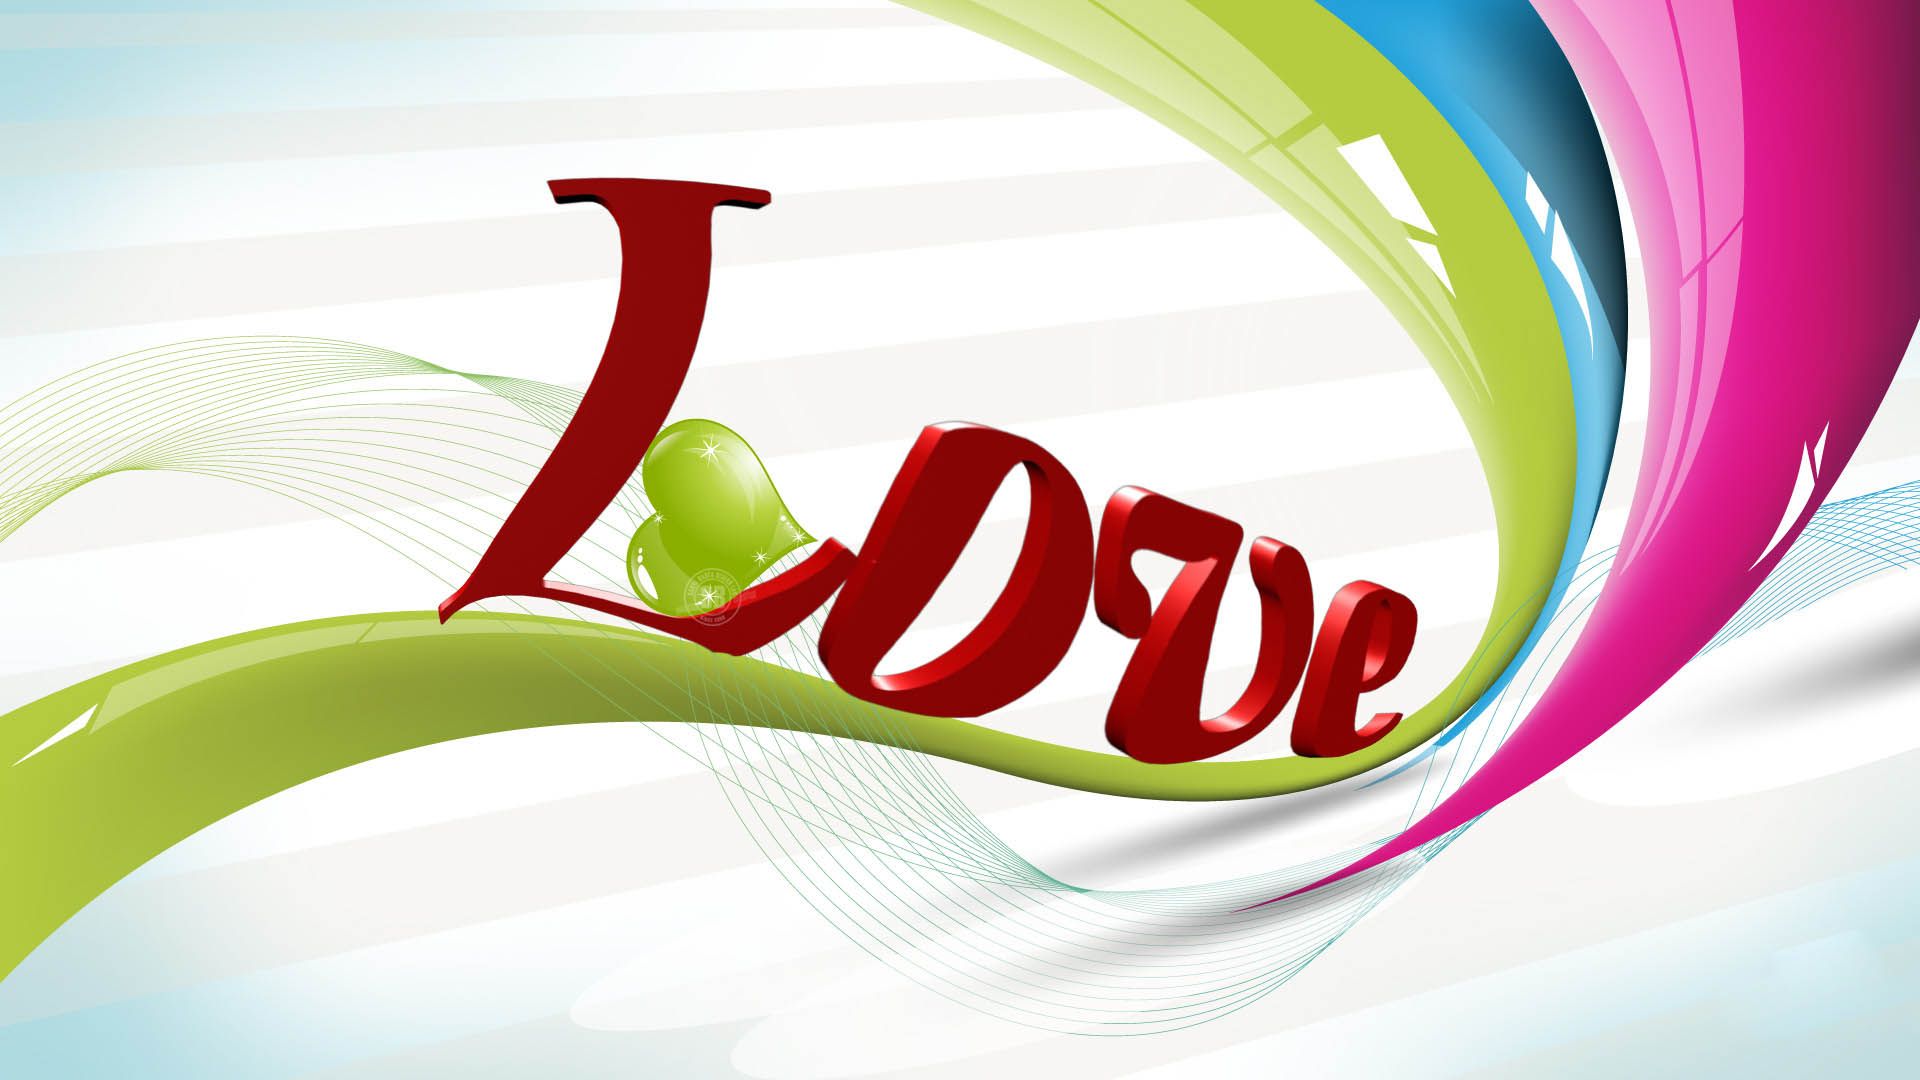 New Love Wallpaper Download Live HD Wallpaper HQ Pictures